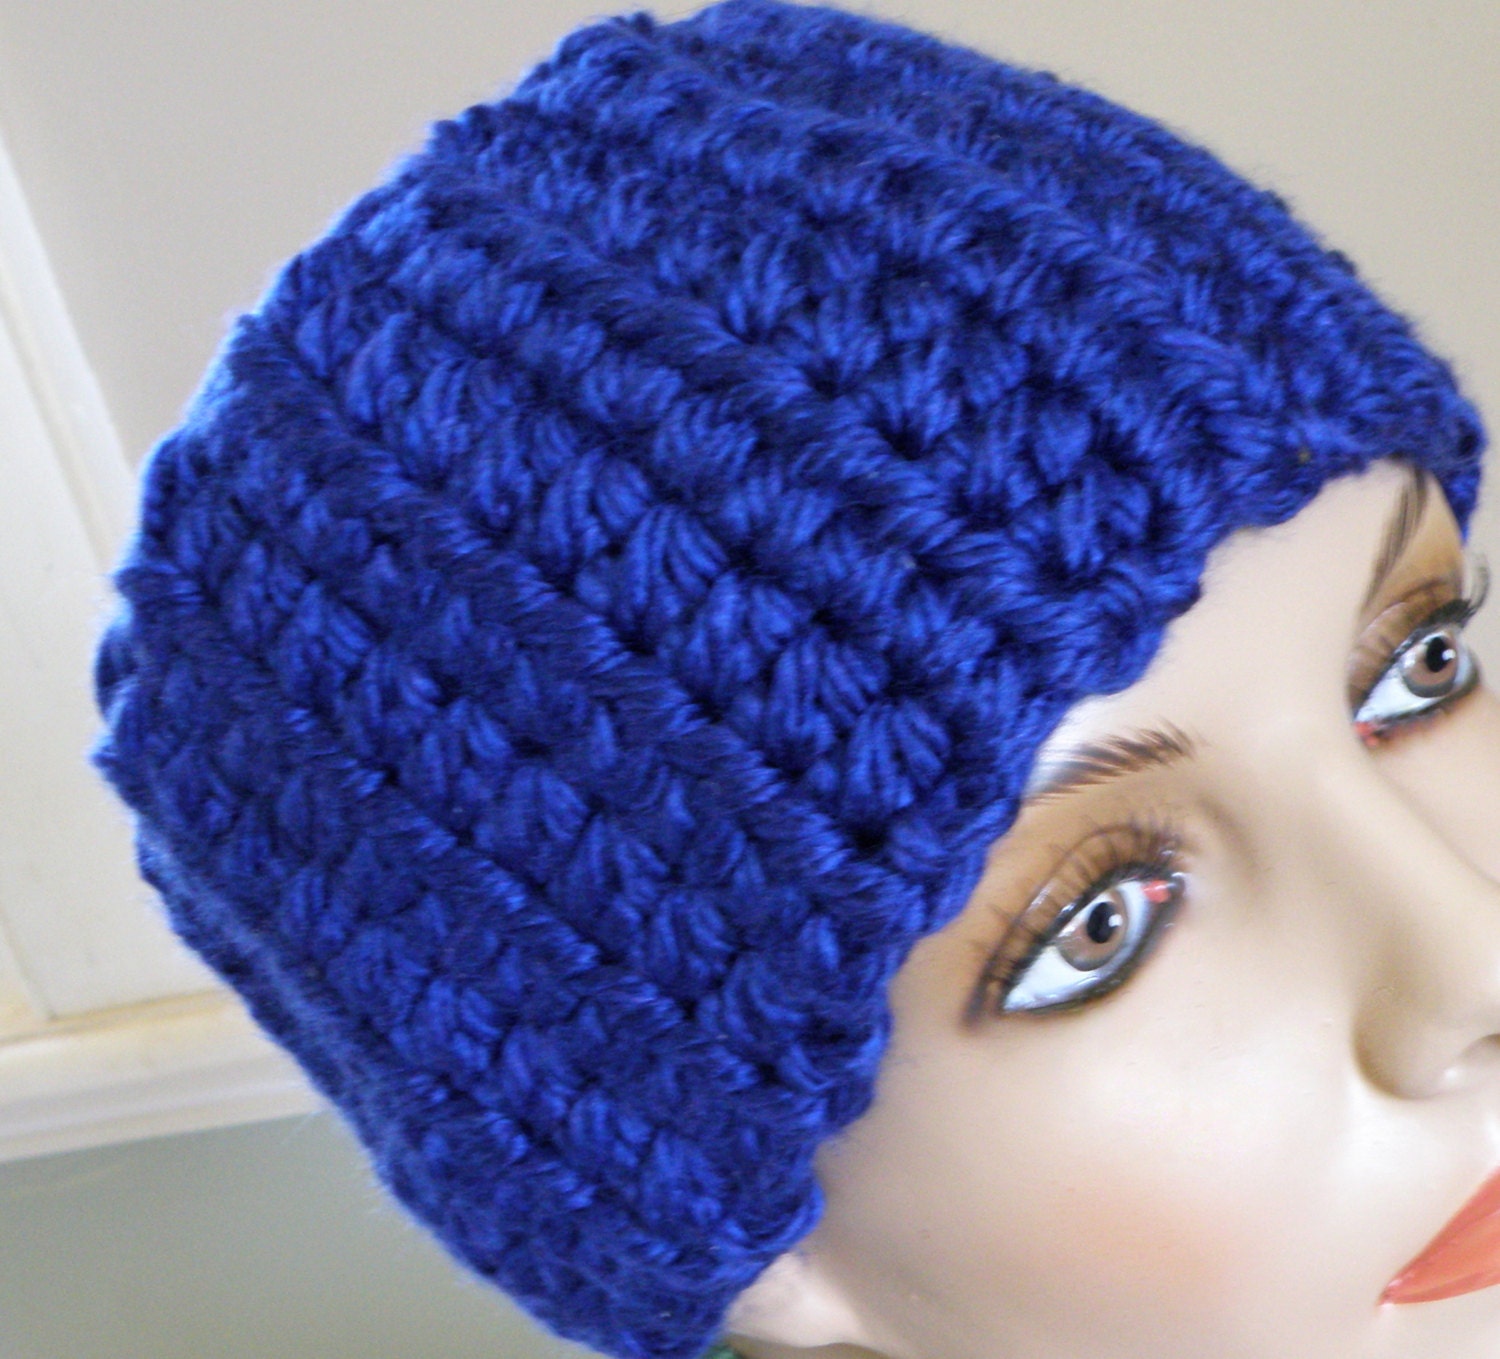 Boho  Headband,  Deluxe thick and chunky Crochet Earwarmer for Cold Weather, Alternative hat, Headband in Blue - CottageCoveCrochet